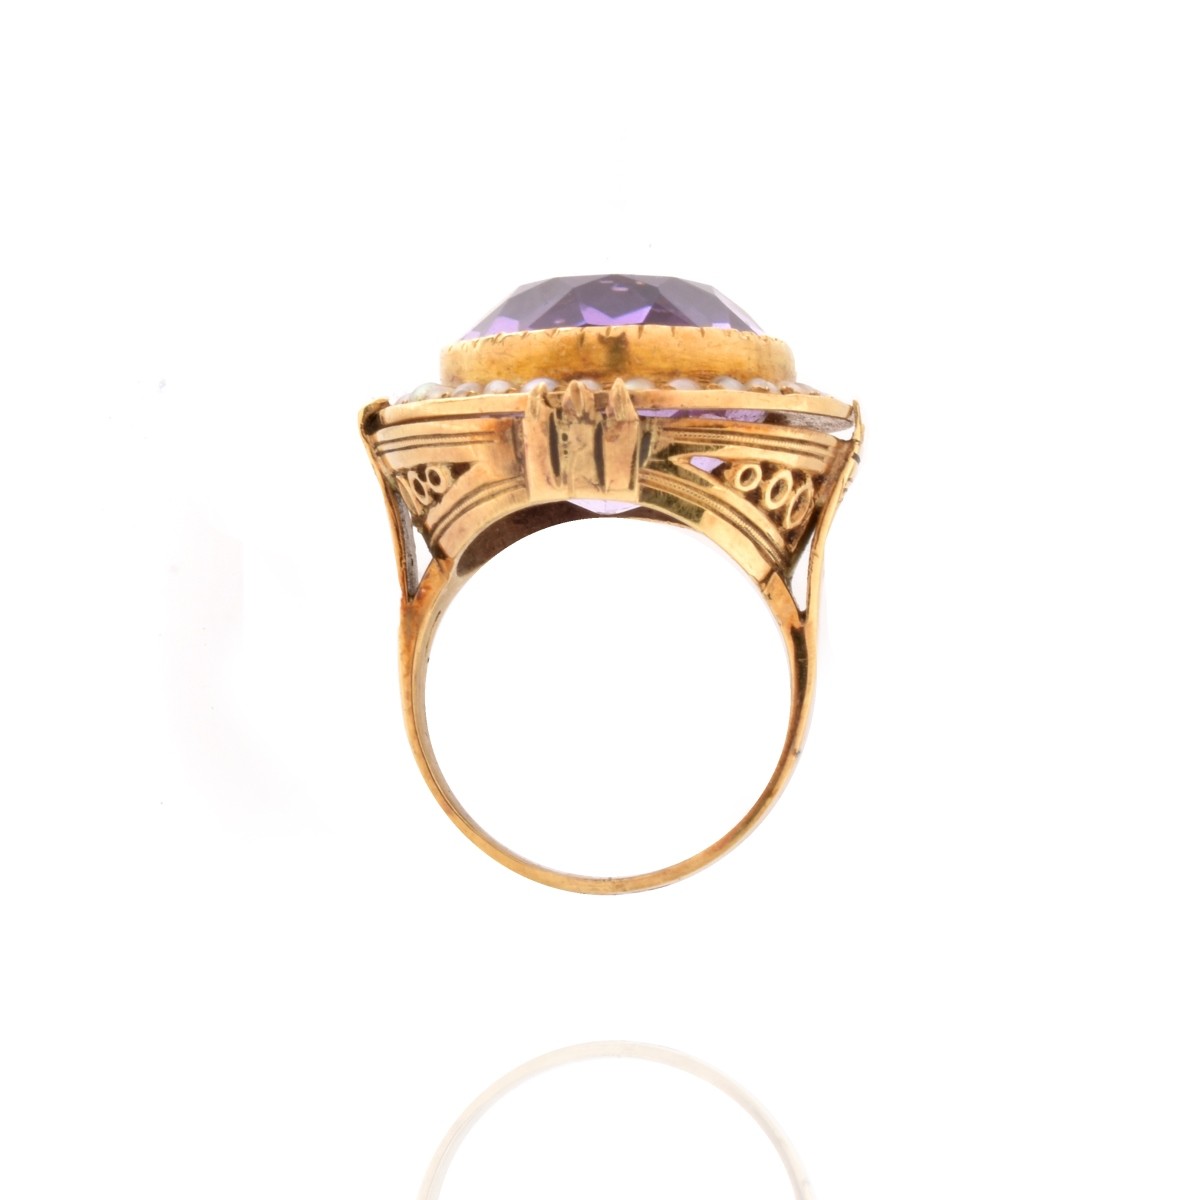 Amethyst, Pearl and 14K Ring